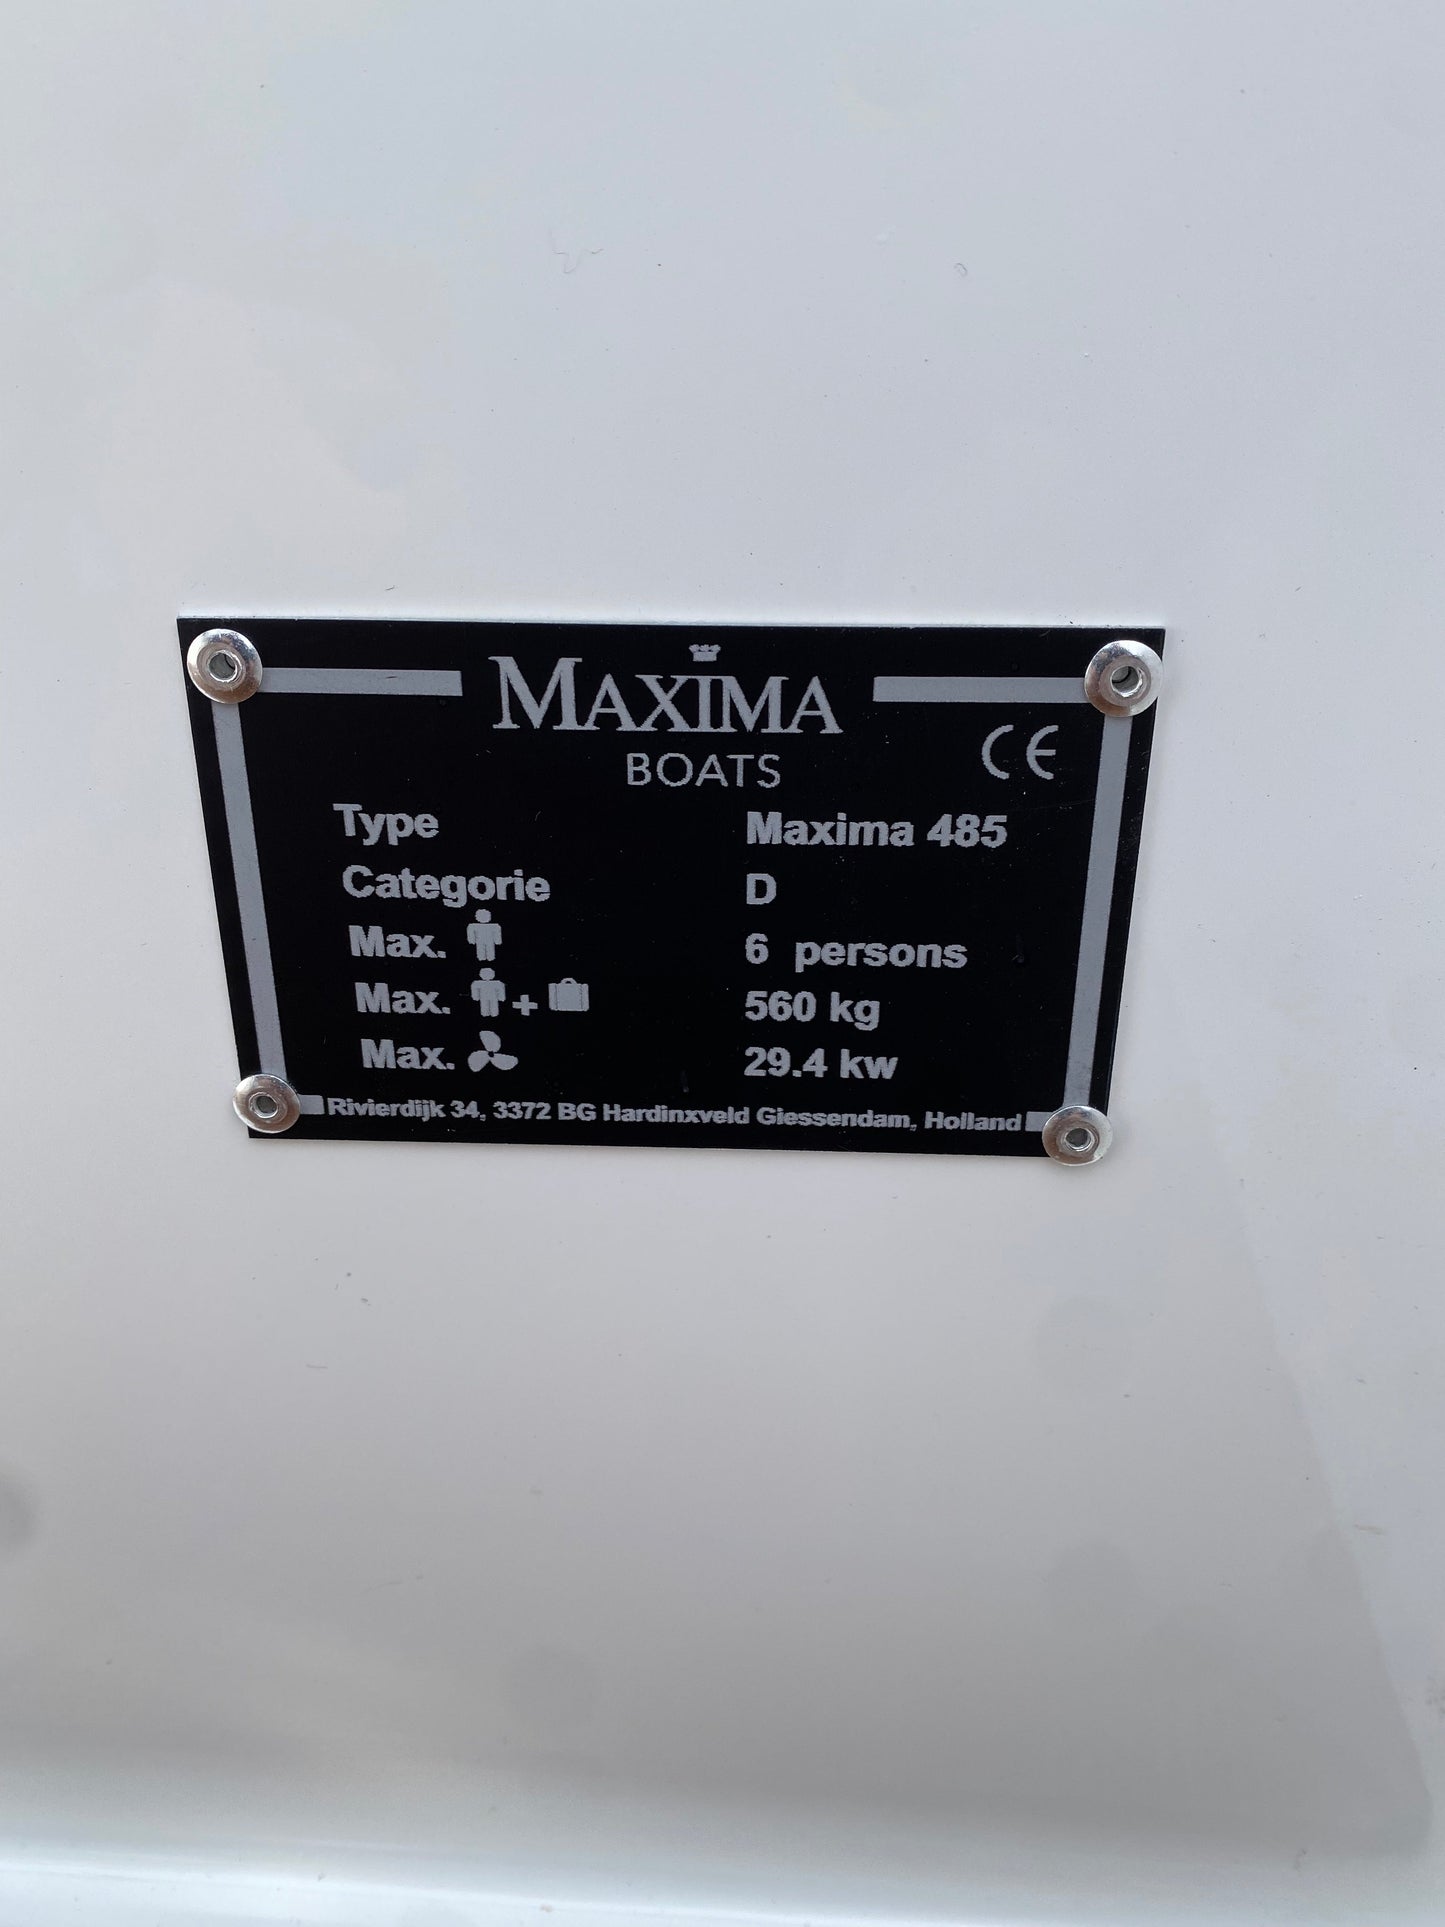 Maxima 485 Powered by Honda BF15 15hp In Stock Now